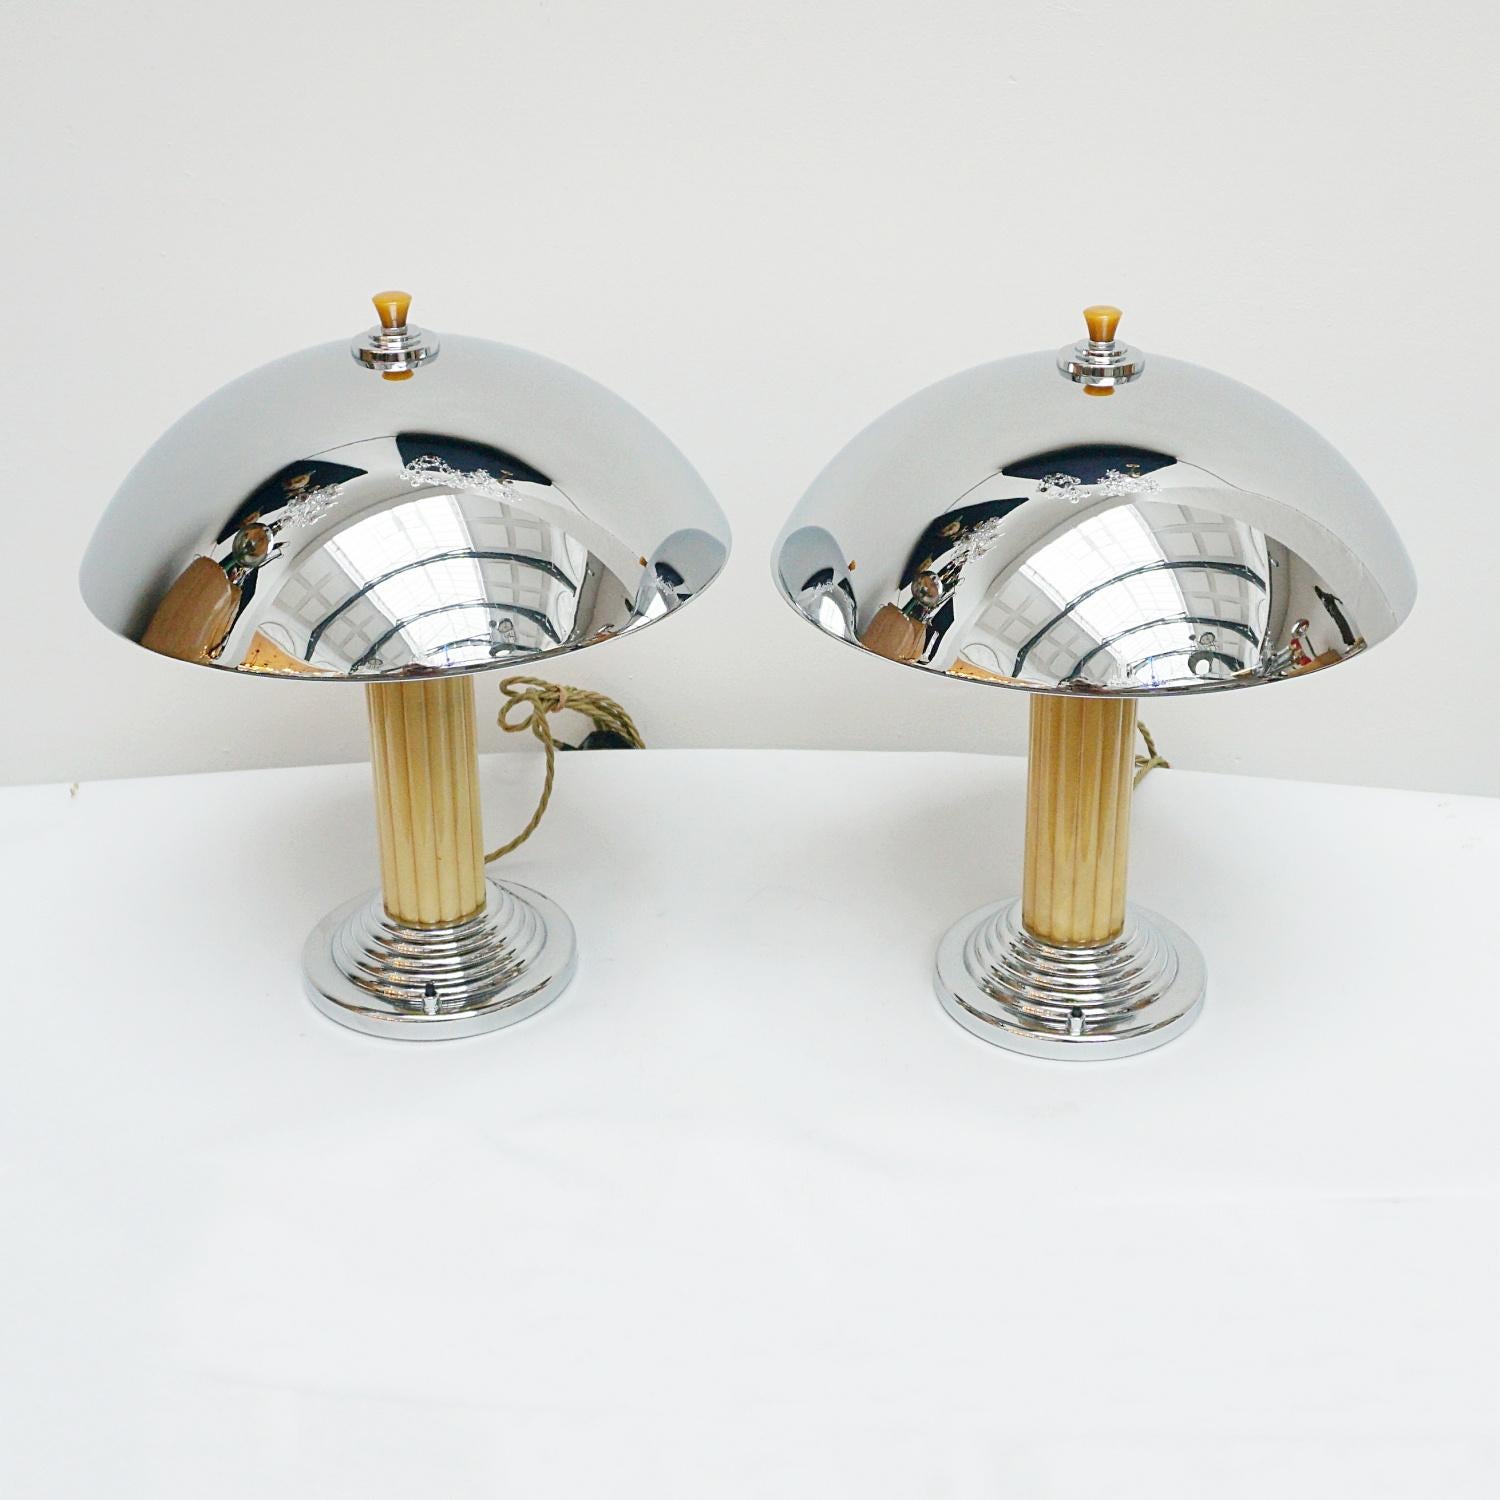 A Pair of Art Deco style dome lamps. Reeded yellow bakelite stem over a stepped chromed metal base. Yellow finial topped chromed metal shade. 

Dimensions: H 44cm Diameter of shade: 35cm, of base: 16cm

Item Number: J237

All of our lighting